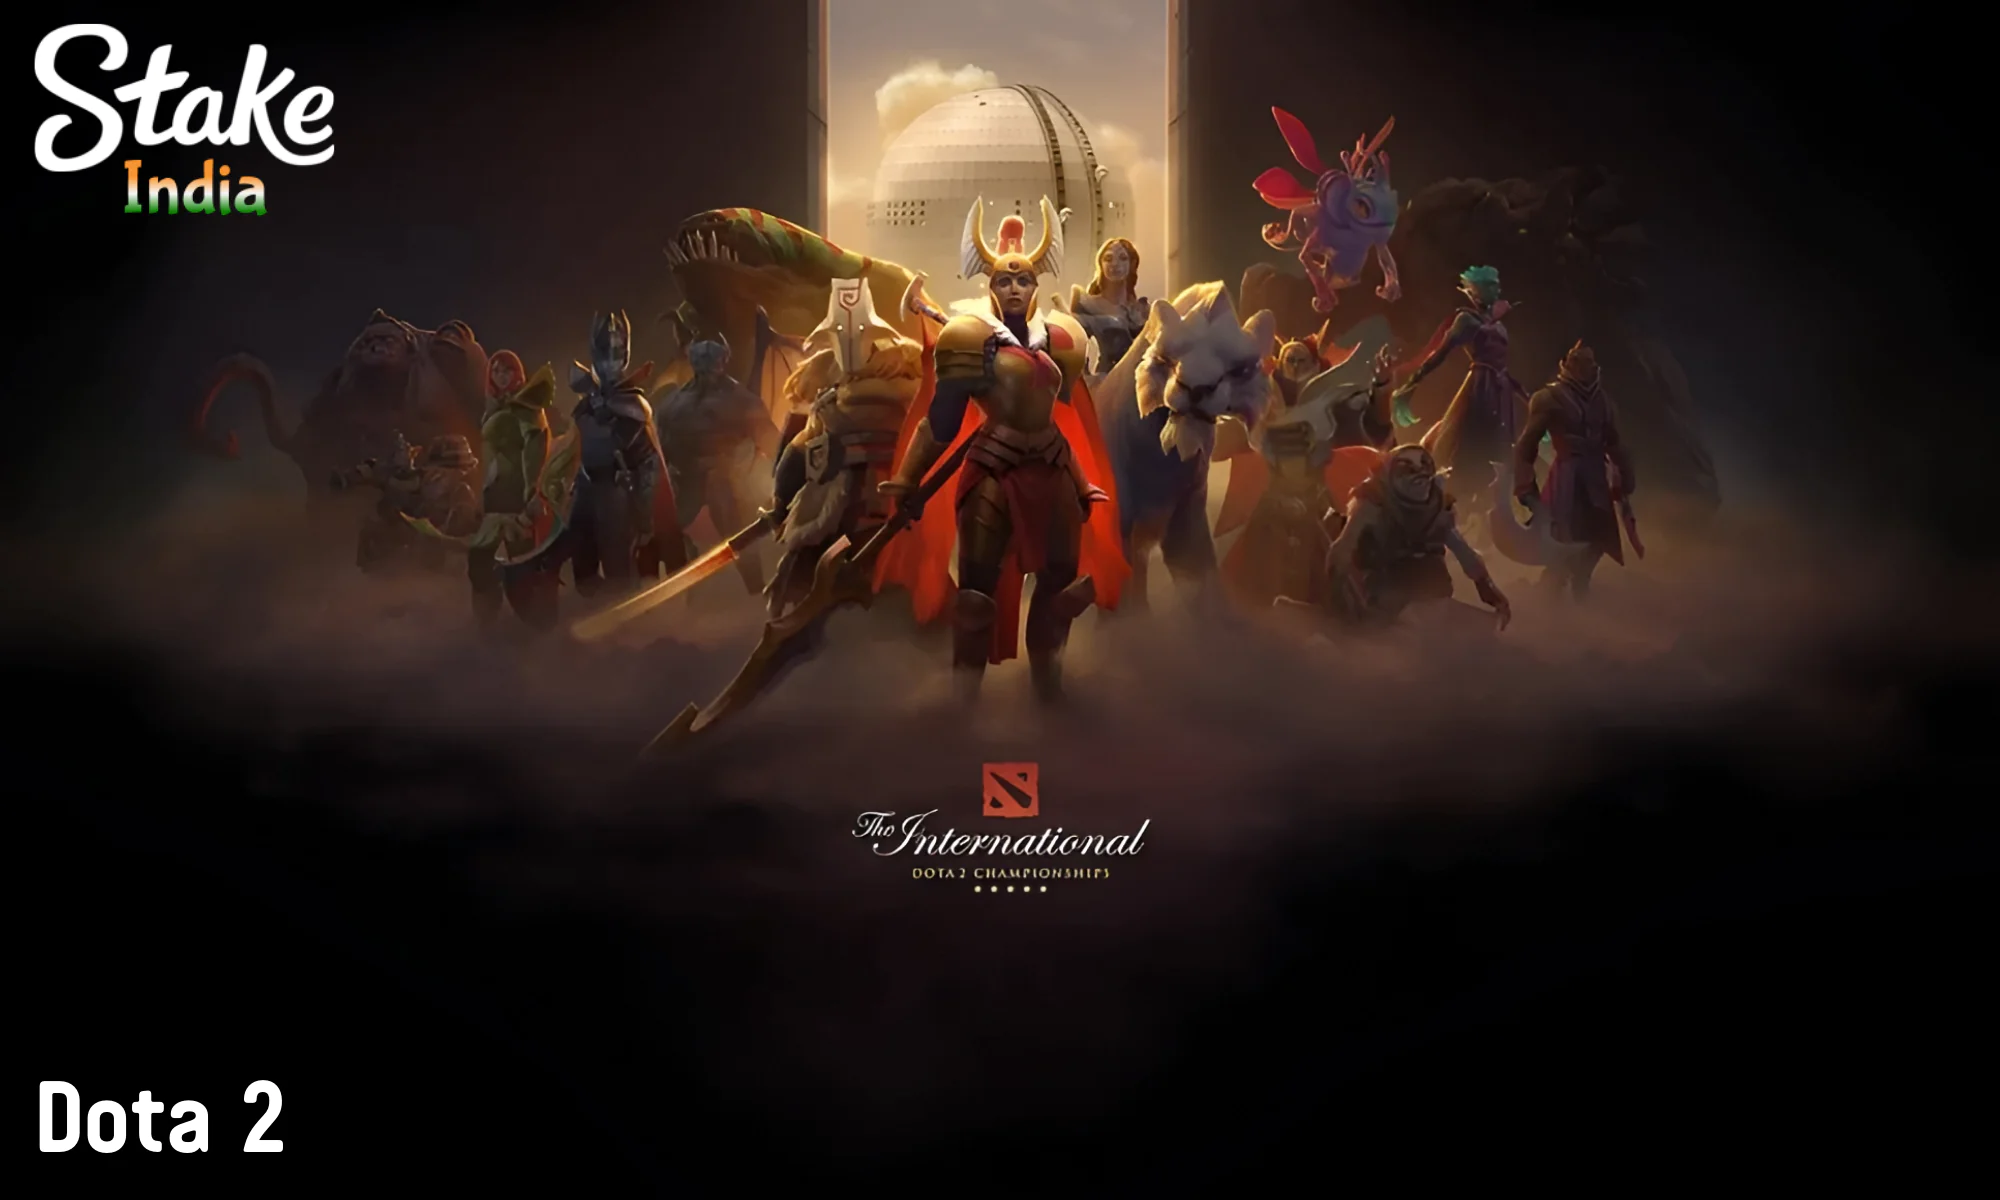 As one of the most popular esports disciplines, Dota 2 and Stake offer users a variety of sports markets